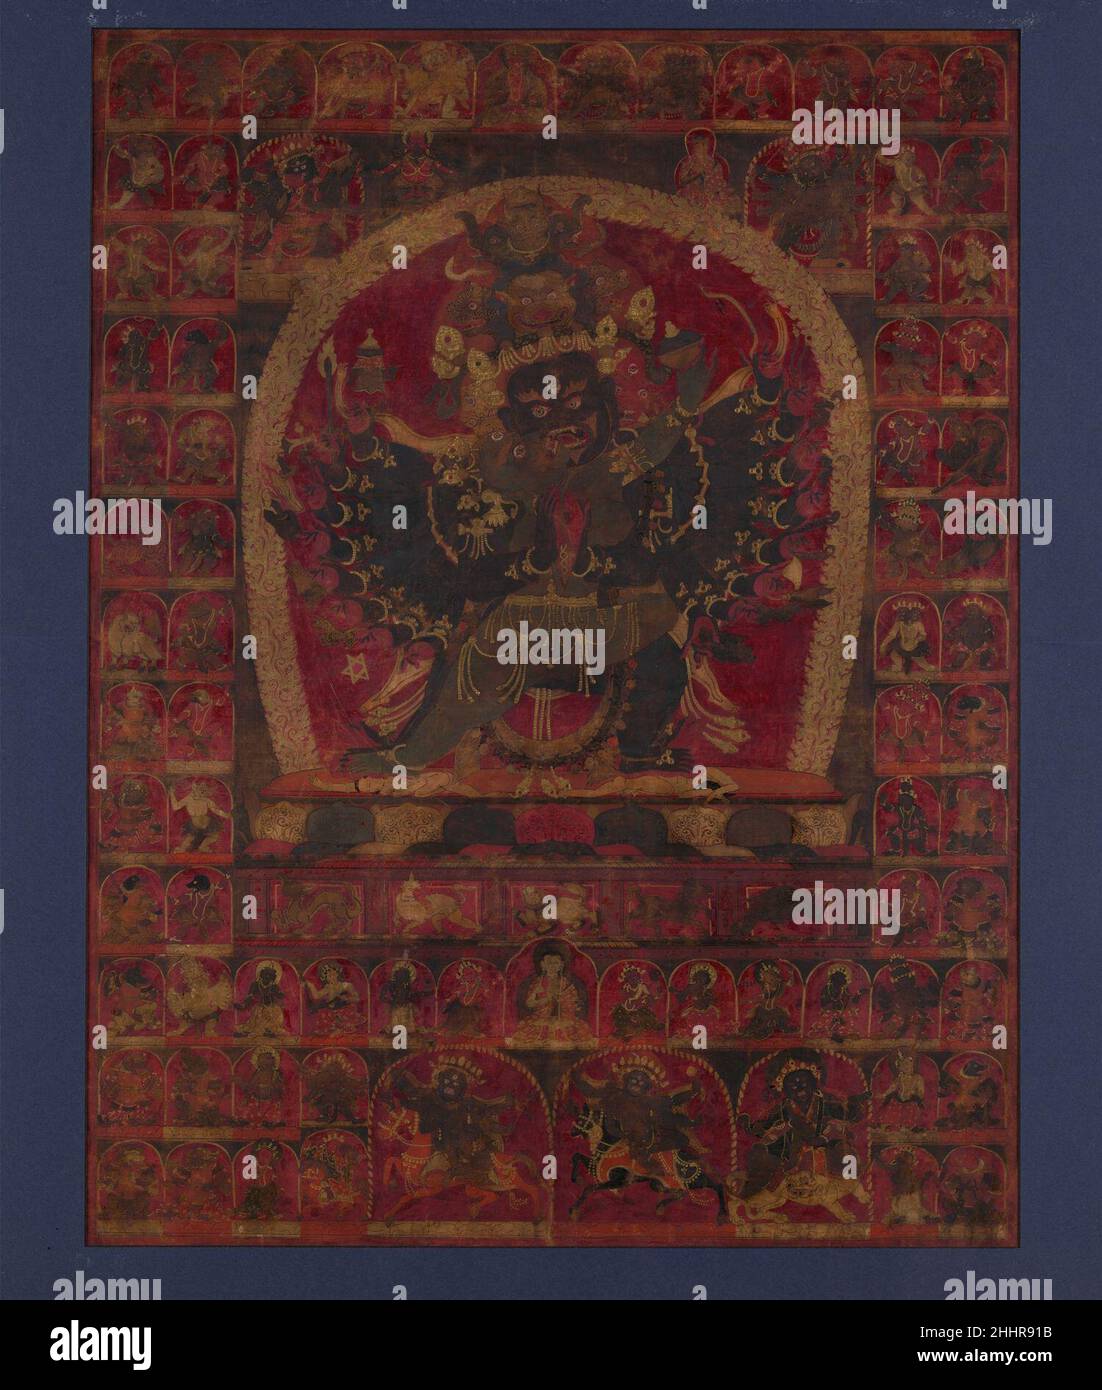 The Wrathful Bon Deity Walse Ngampa, One of the Five Fortress Meditational Deities early 15th century Tibet. The Wrathful Bon Deity Walse Ngampa, One of the Five Fortress Meditational Deities. Tibet. early 15th century. Ink, gold and opaque watercolor on cloth. Paintings Stock Photo